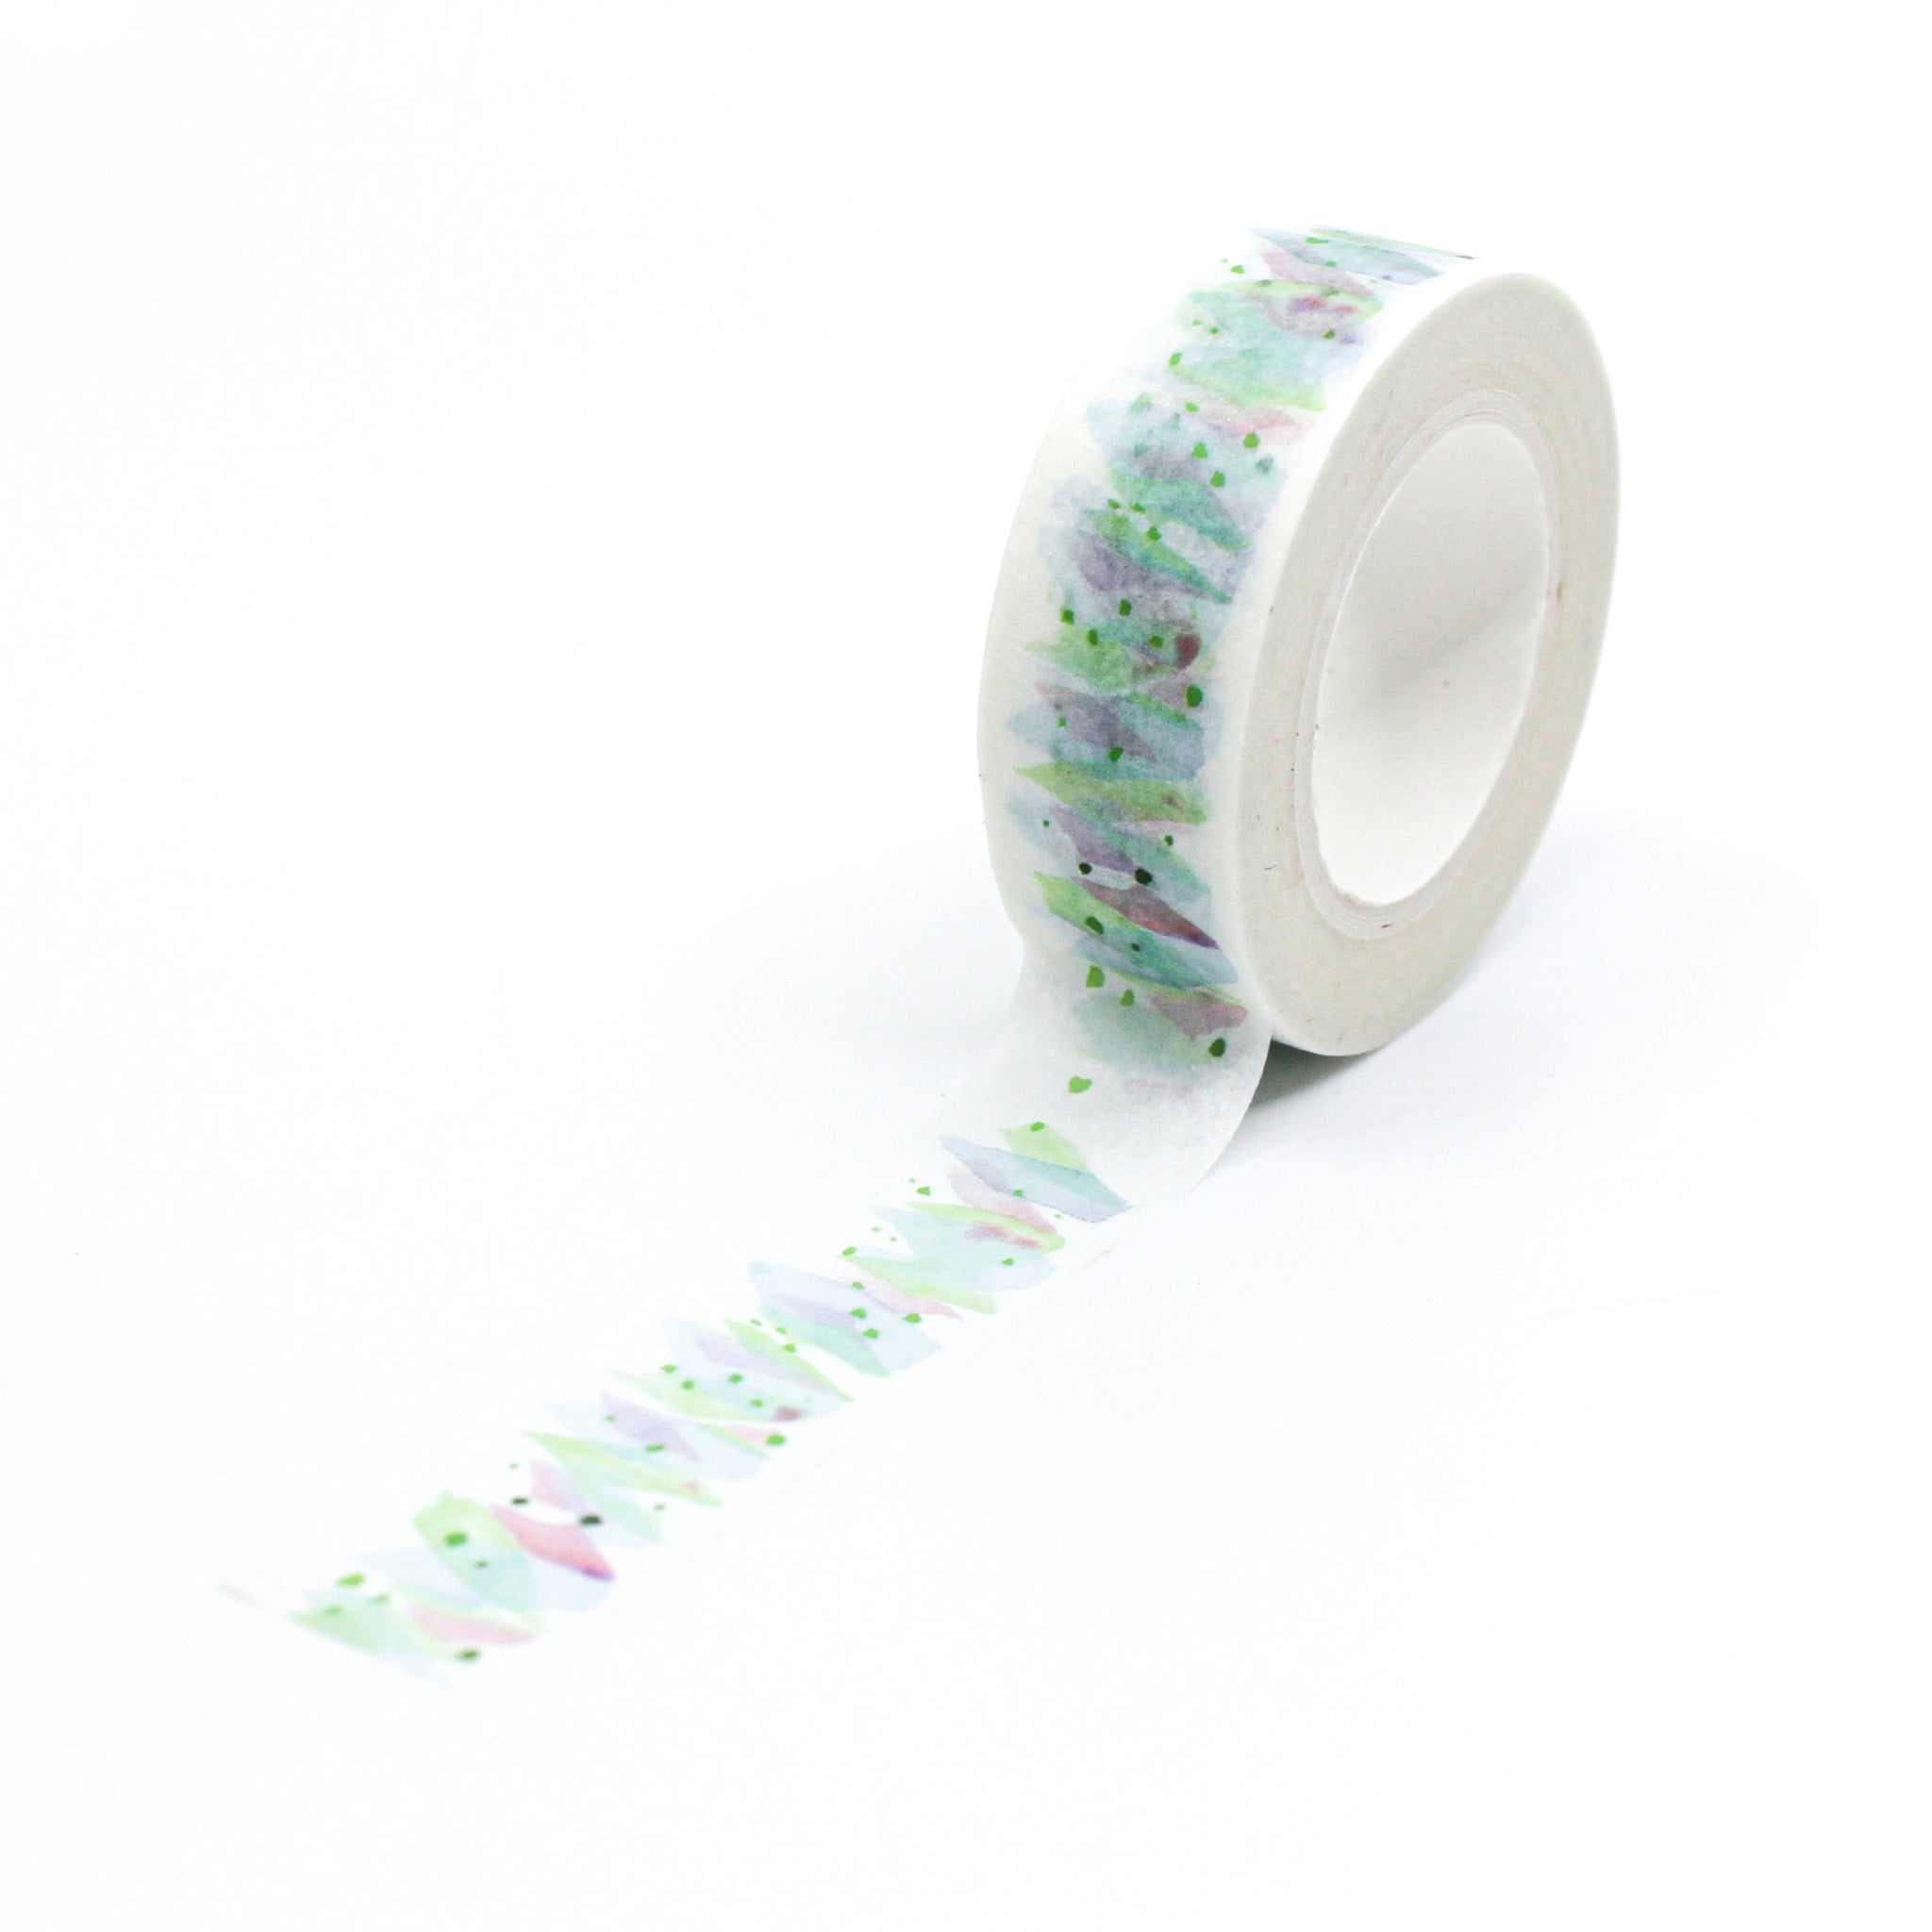 Green Crystal Geode Sparkling Washi Tape for your planner or craft project. This tape is sold by BBB Supplies Craft Shop.